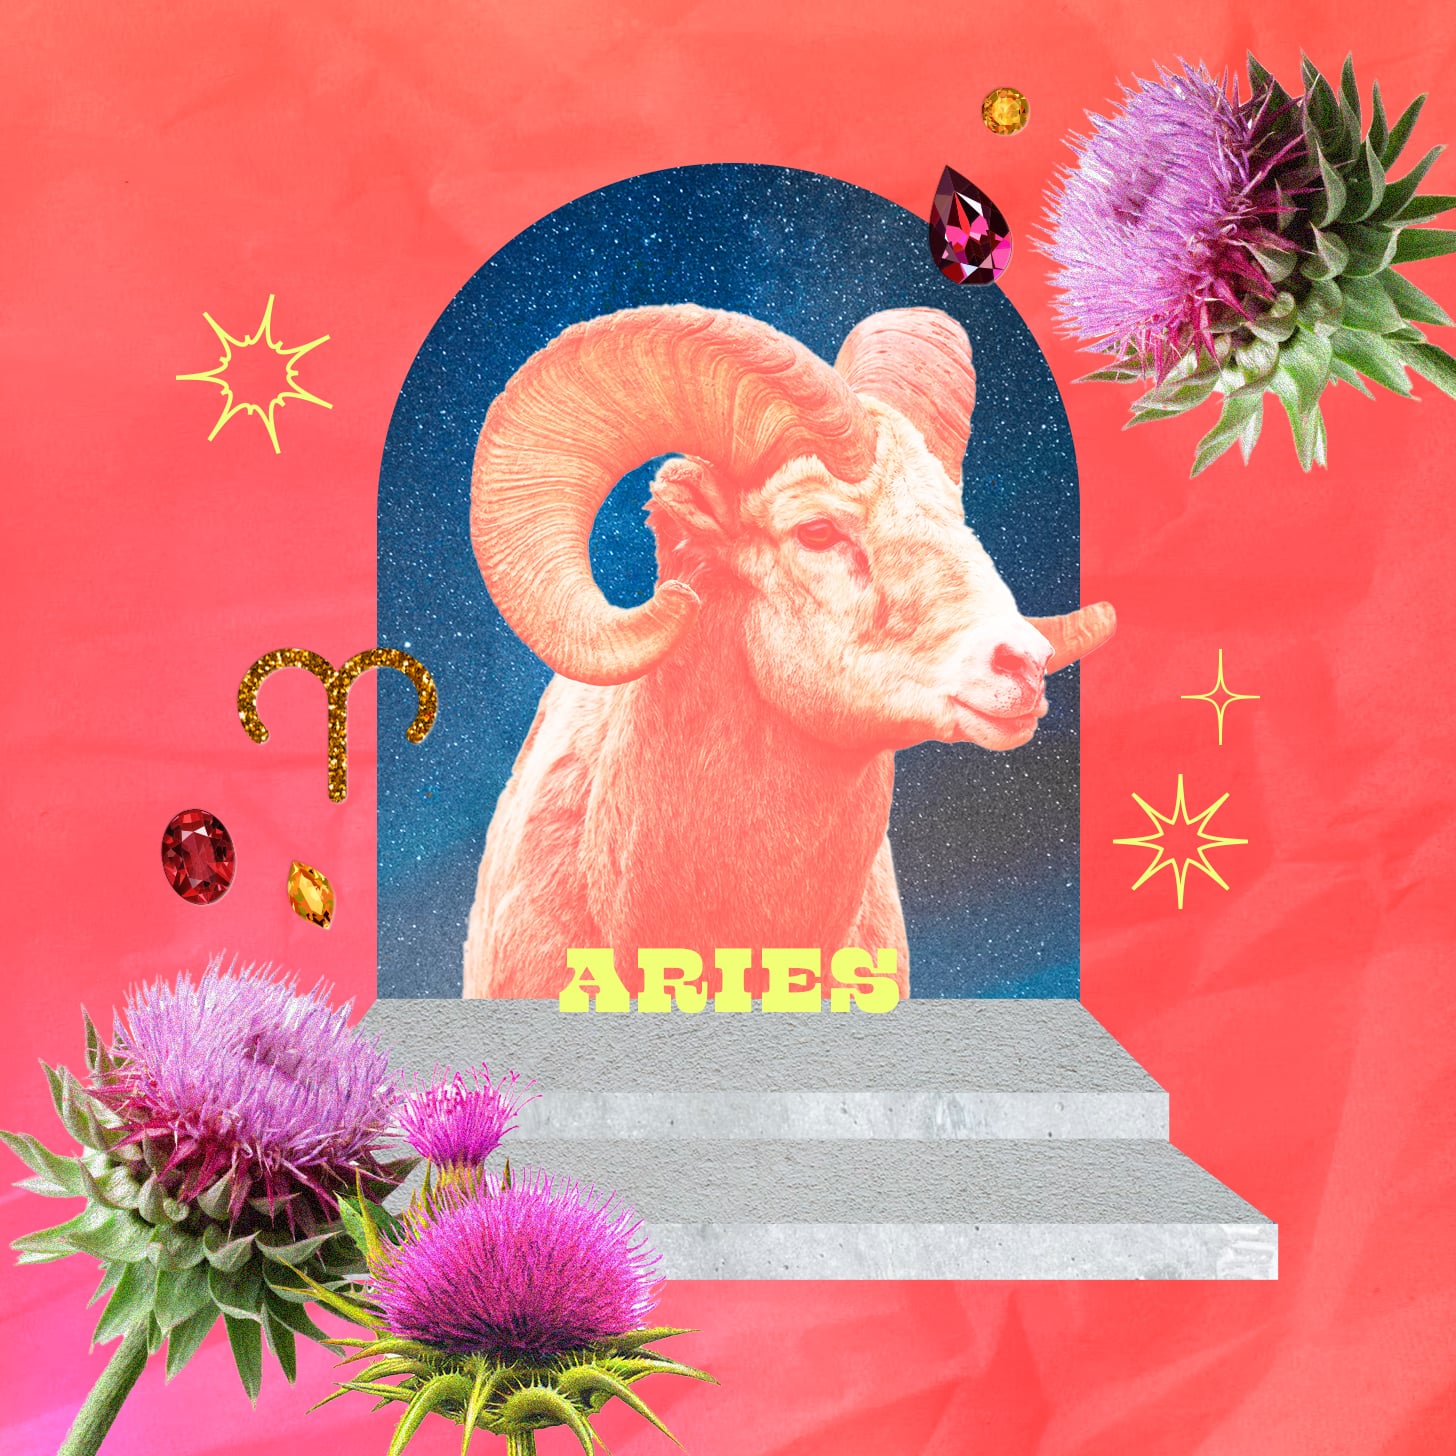 Aries weekly horoscope for May 22